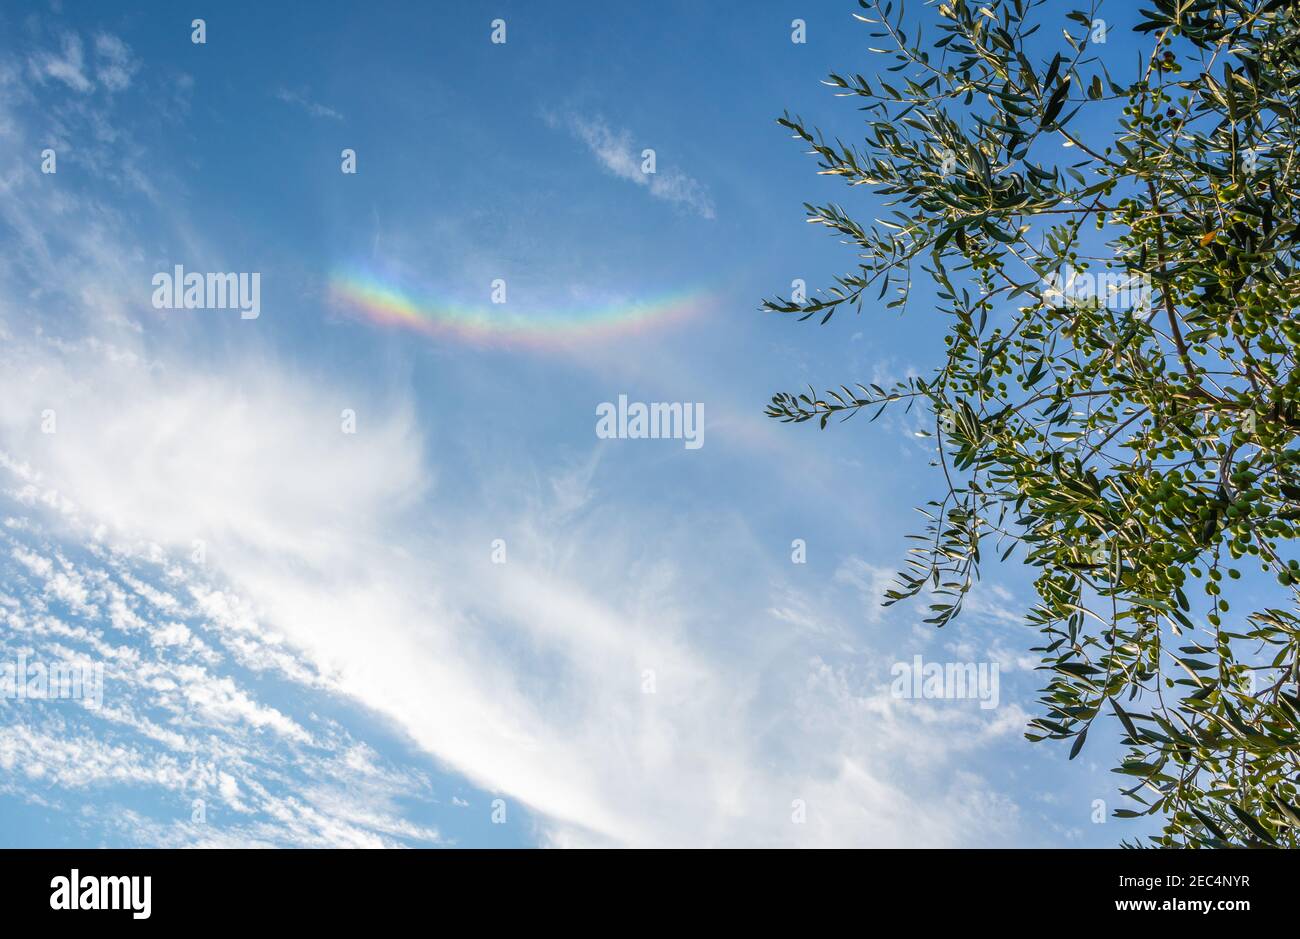 Sun dog (Parhelion)  the sky above the walls of Monteriggioni village in the Siena province, Tuscany - Italy Stock Photo